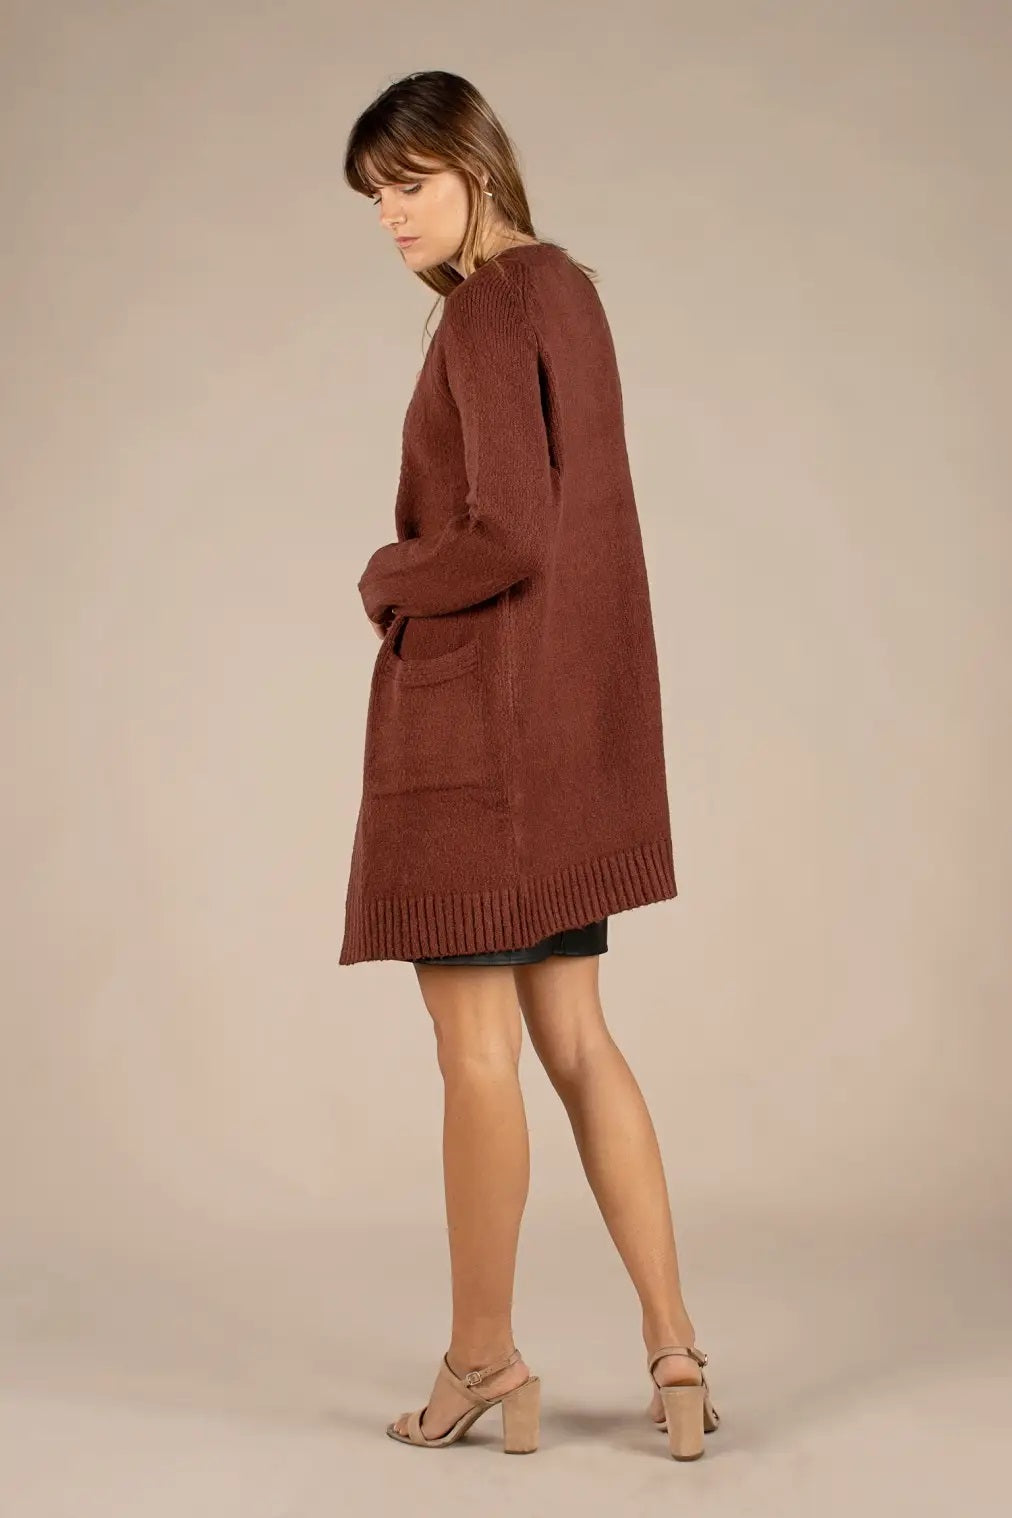 all:row, The Rayna Cardigan Sweater in Dark Brown - Boutique Dandelion